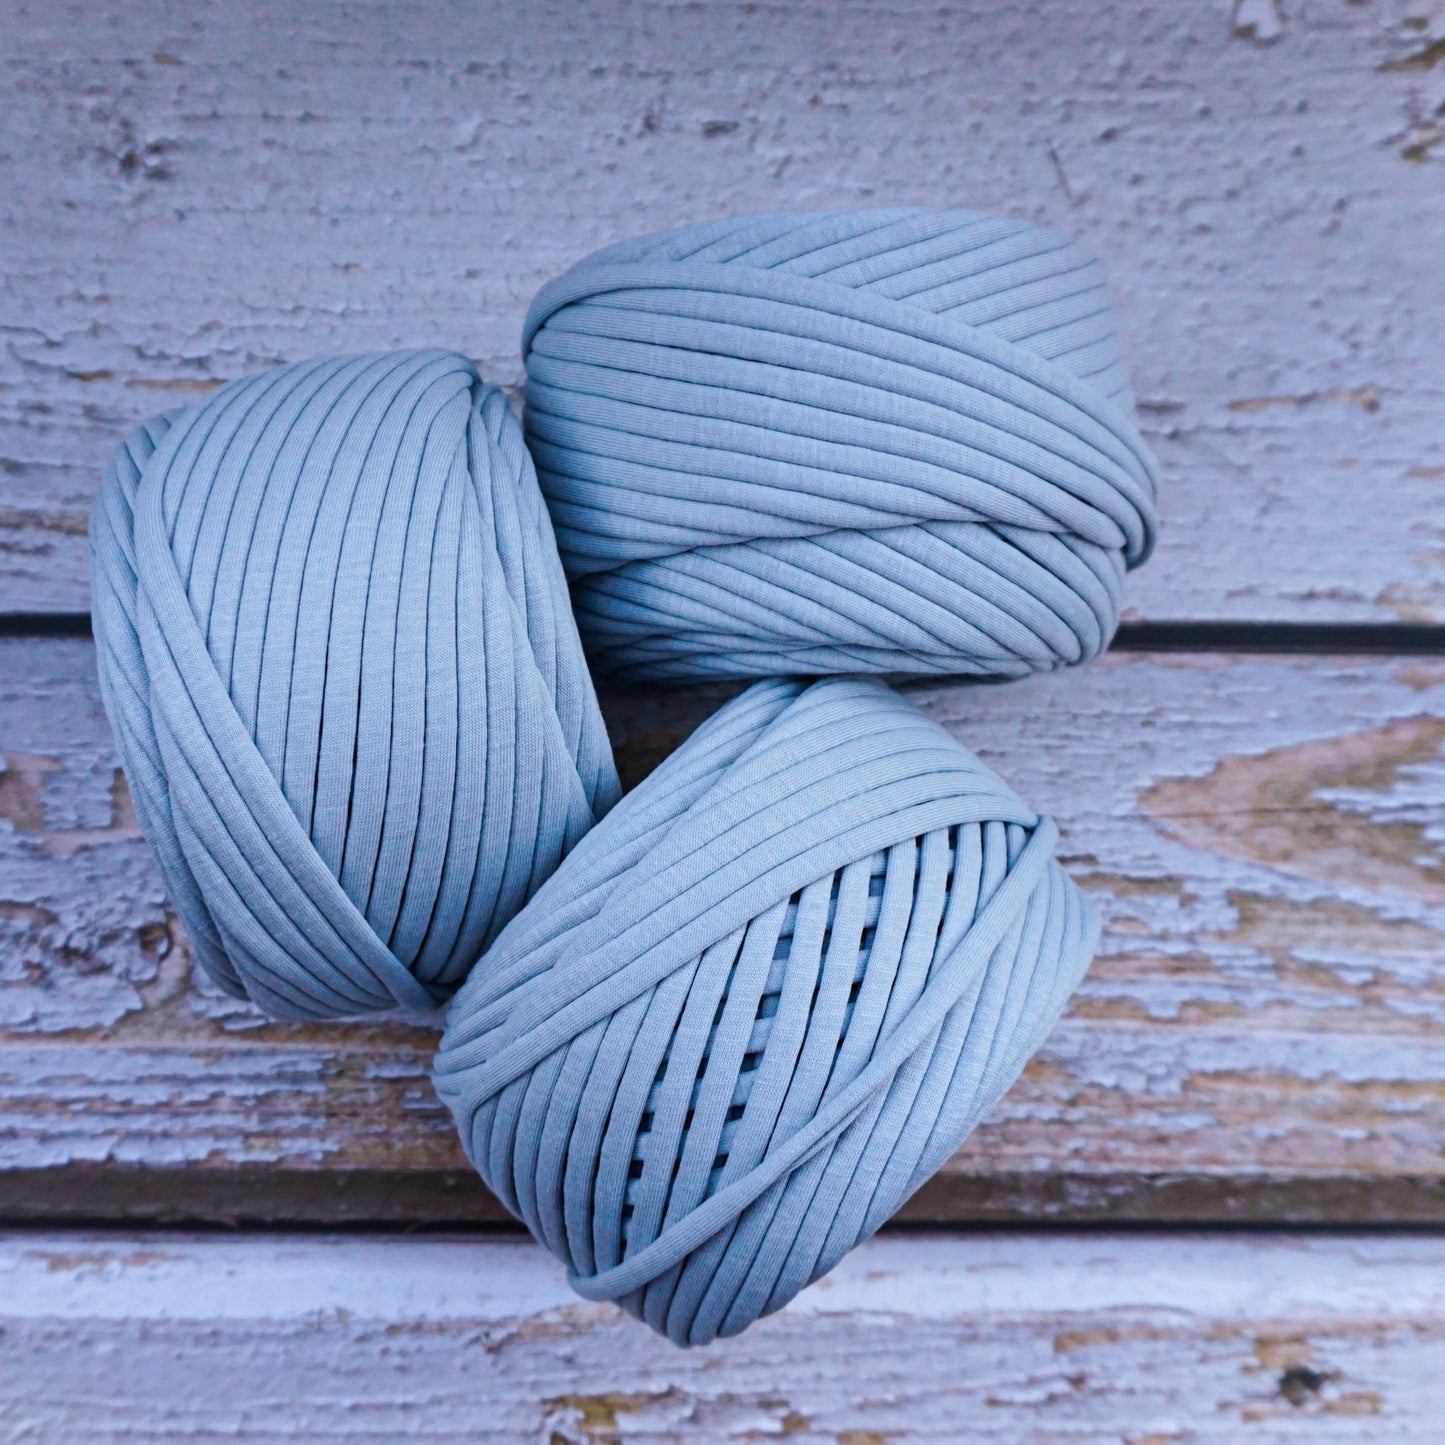 T-shirt yarn for crocheting baskets, bags, rugs and home decor. Bulky Yarn Silver blue